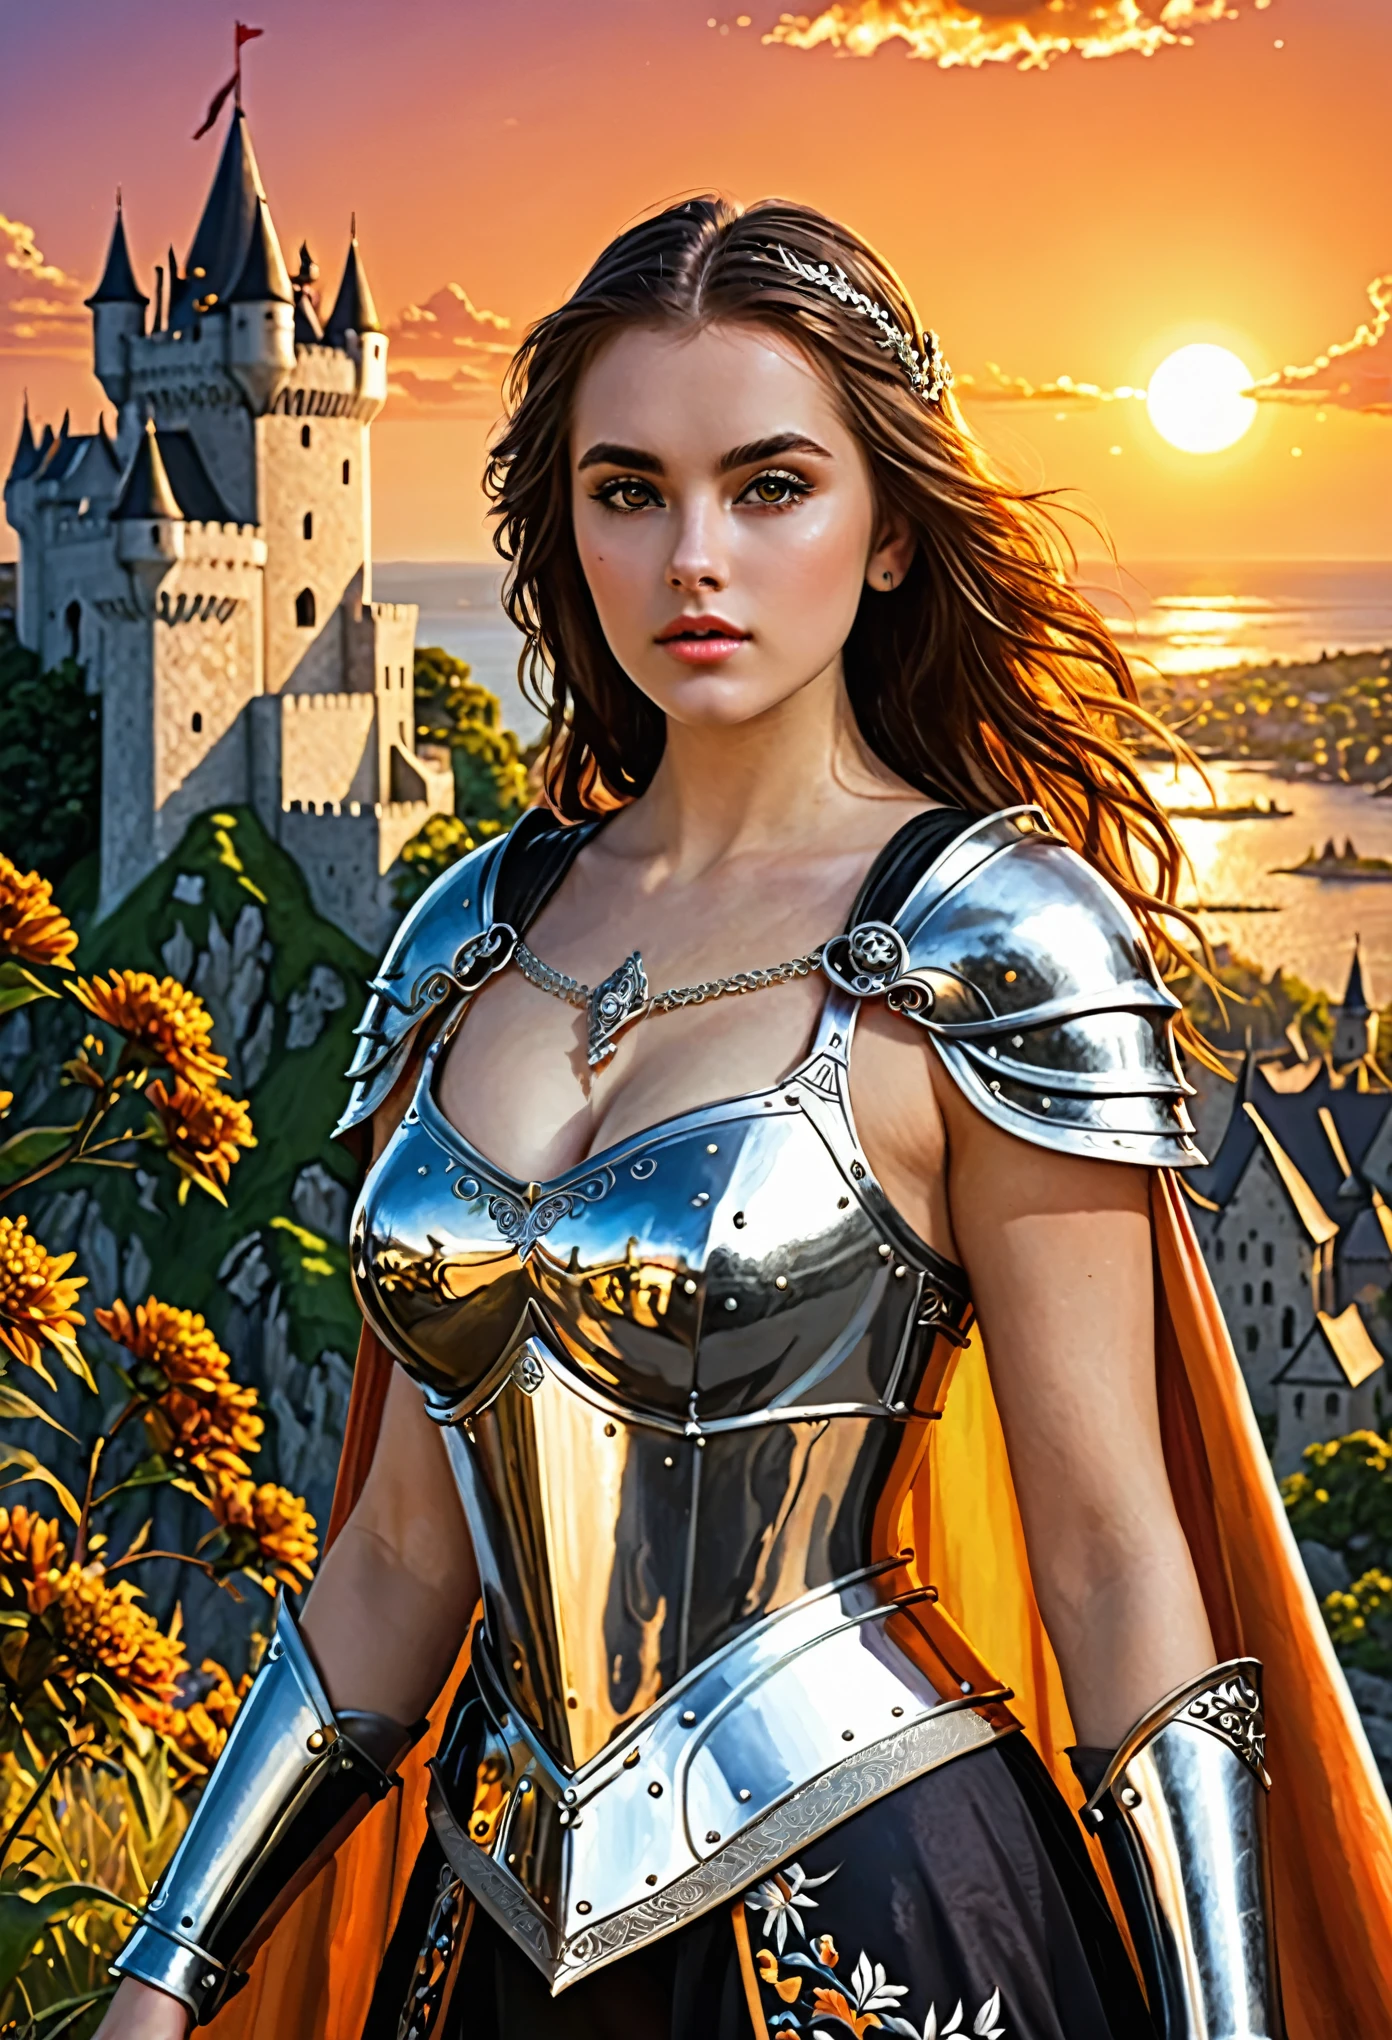 (masterpiece, top quality, best quality, official art, beautiful and aesthetic:1.2),(colorful:1.2),

(1girl:1.2),

beautiful face, pale face, black eyes, a pale warrior princess, woman  shining eyes, serious expression,blade right hand, cleavage, sexy, bikini armor

cape, embroidery,silver_armor, detailed medieval fortress in background, fantasy setting, sunset, sunny day

(translucent and dark orange colors:0.1), fantasy concept art, 